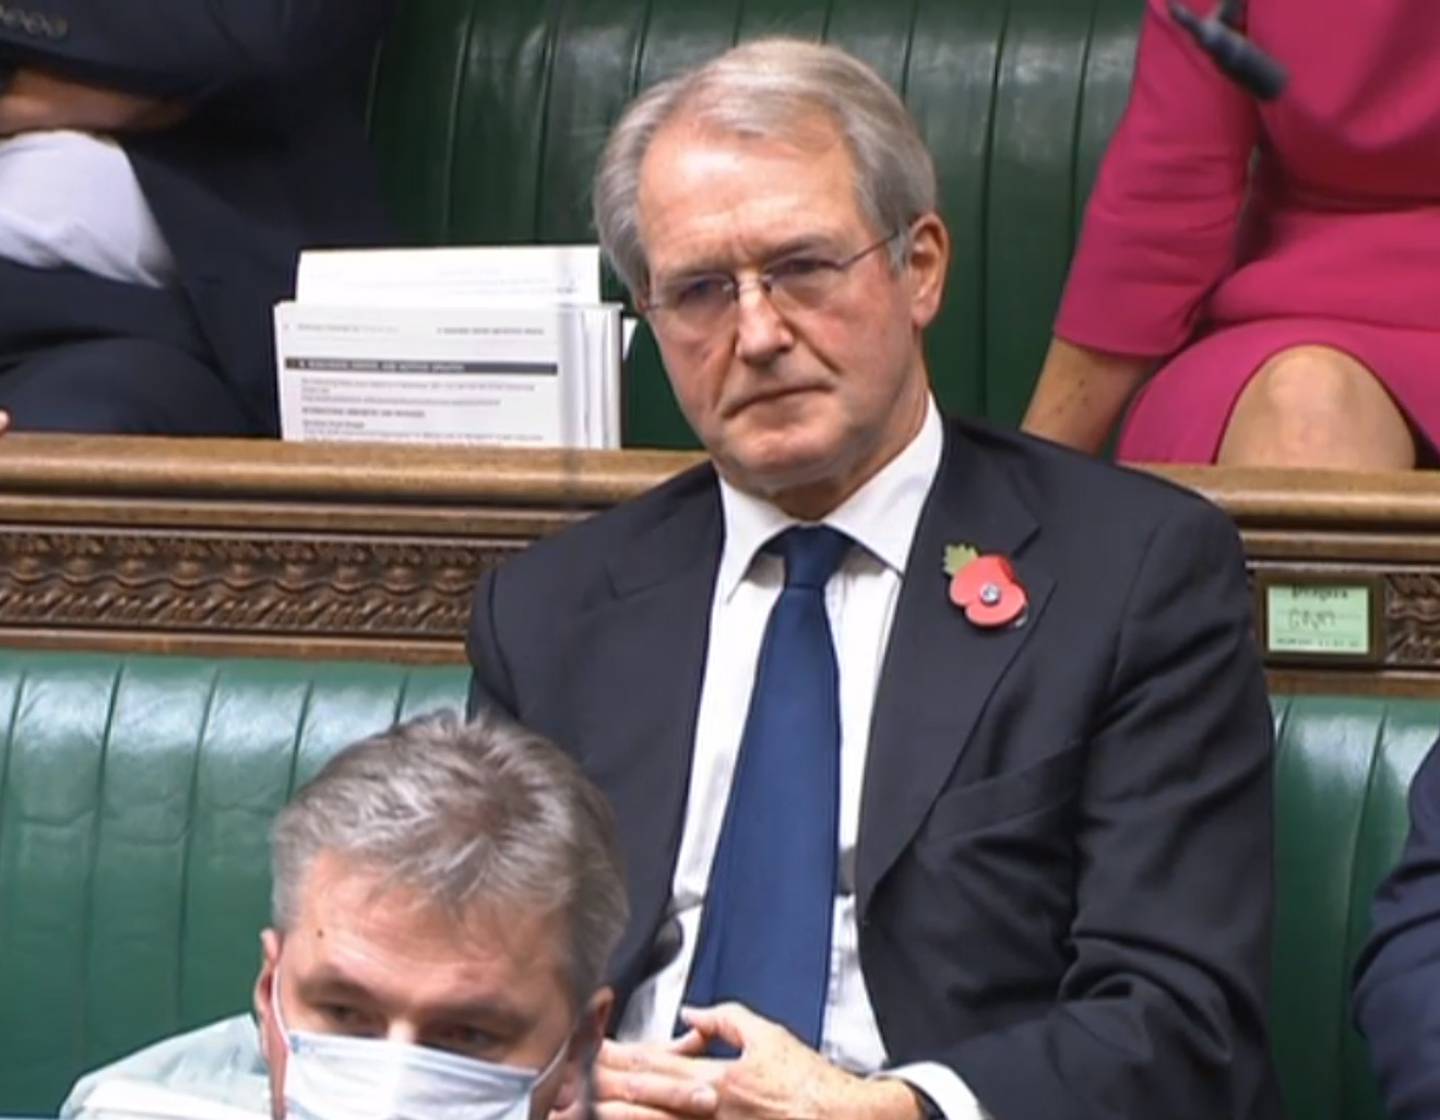 Owen Paterson who has has resigned as the MP for North Shropshire. Prime Minister Boris Johnson has promised MPs a fresh vote on Owen Paterson's suspension for an alleged breach of lobbying rules "as soon as possible". PA Wire